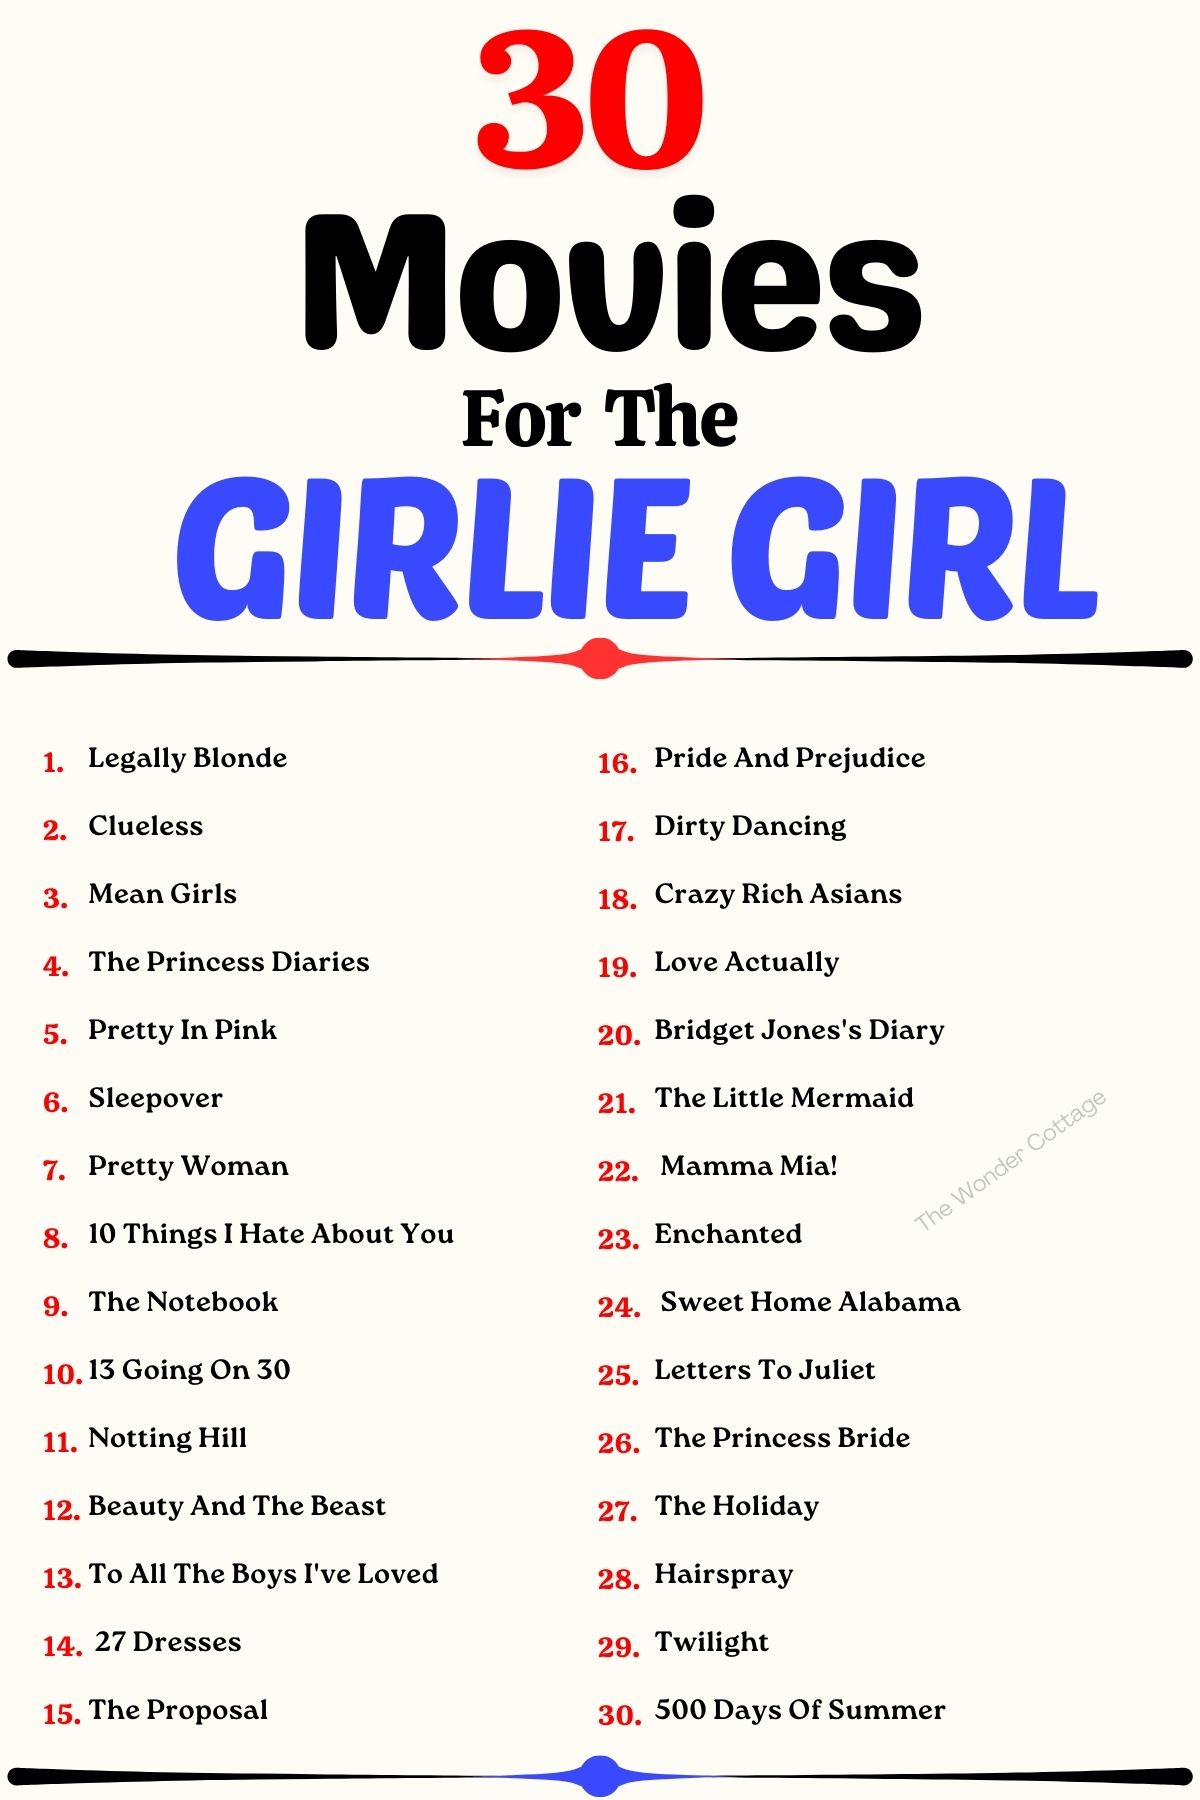 30 Movies For The Girlie Girl